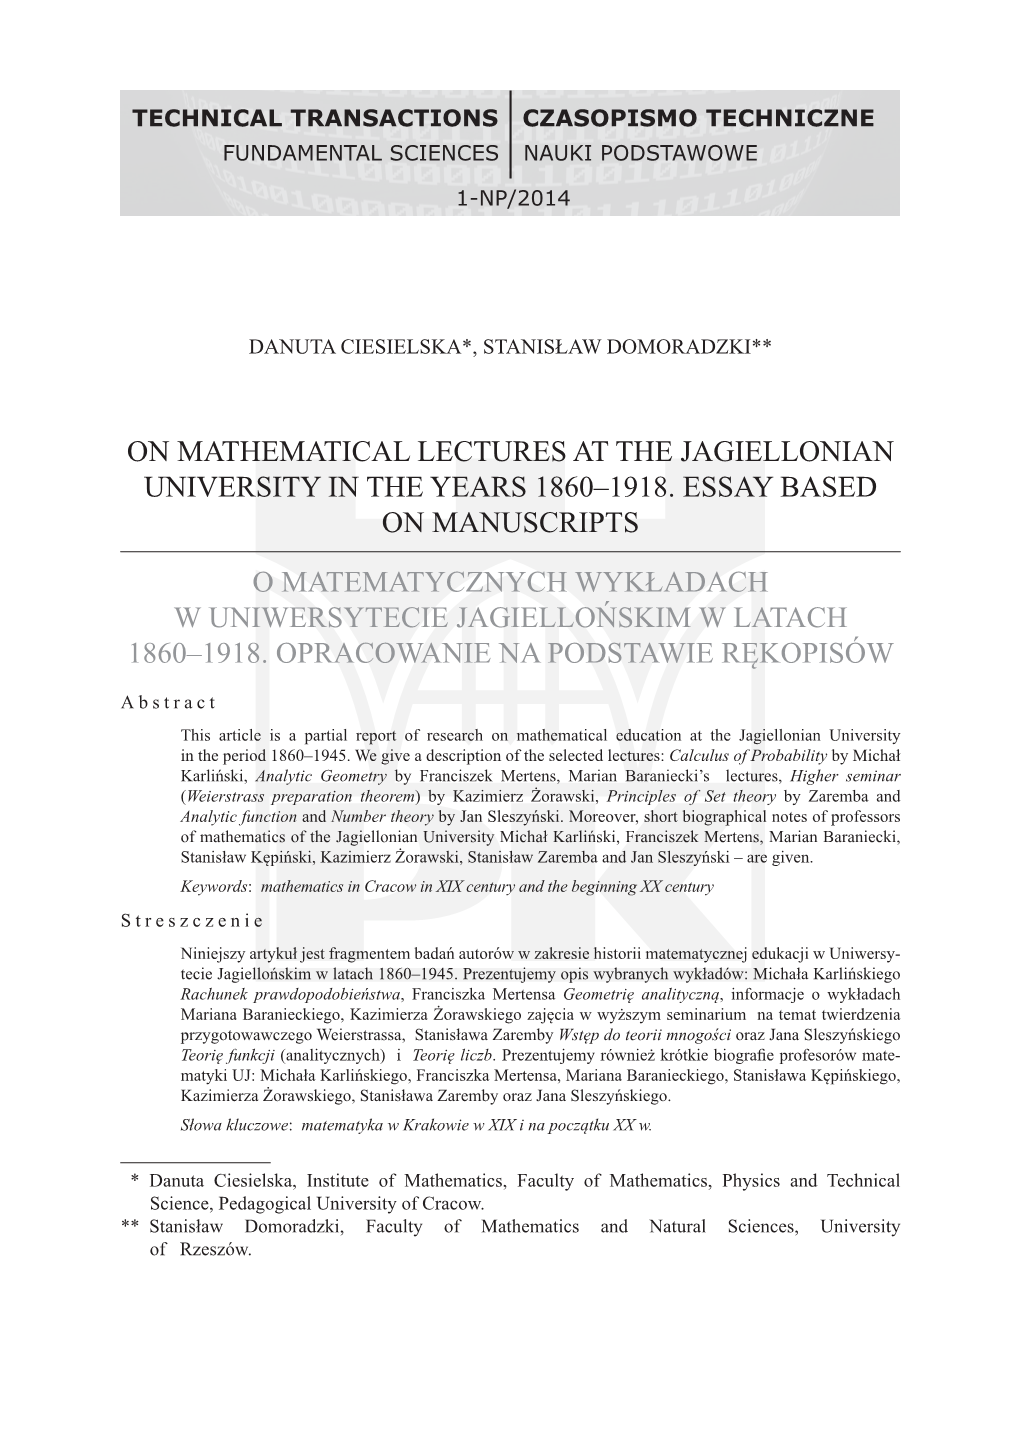 On Mathematical Lectures at the Jagiellonian University in the Years 1860‒1918